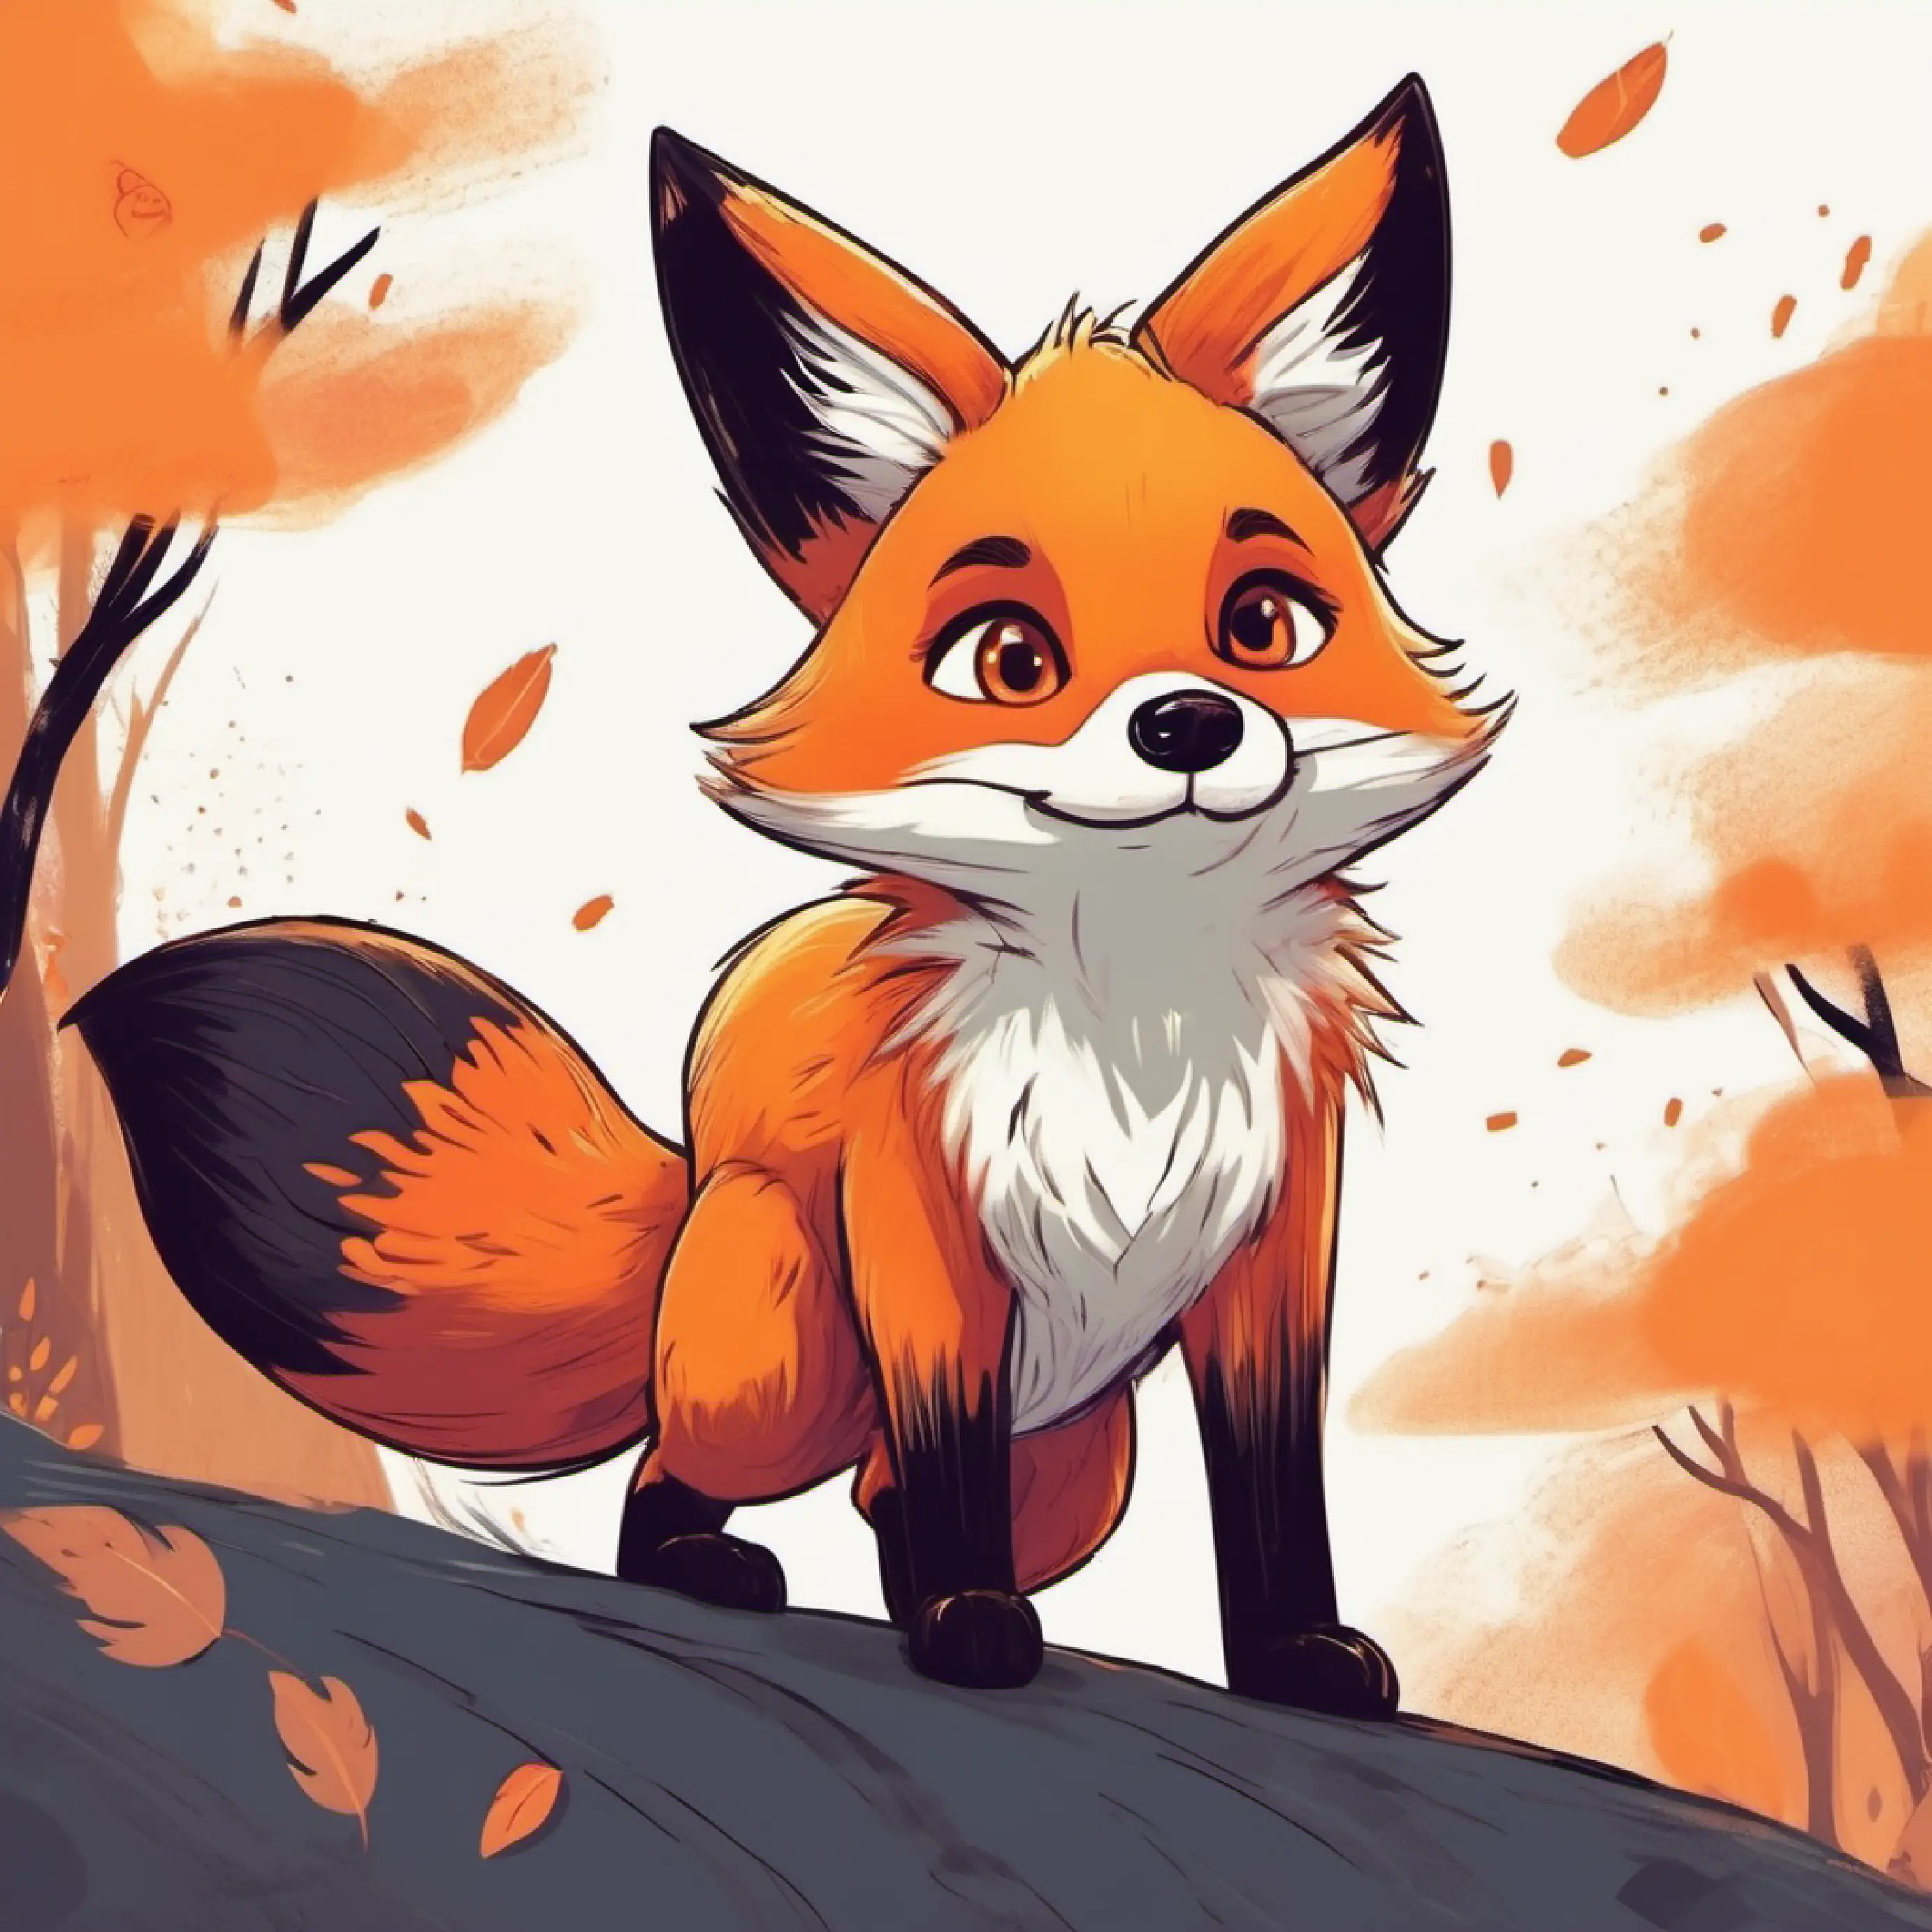 Tiny fox with bright fur, wide and innocent eyes in distress, Orange fur, curious eyes, swift and rather playful realizing the mistake.